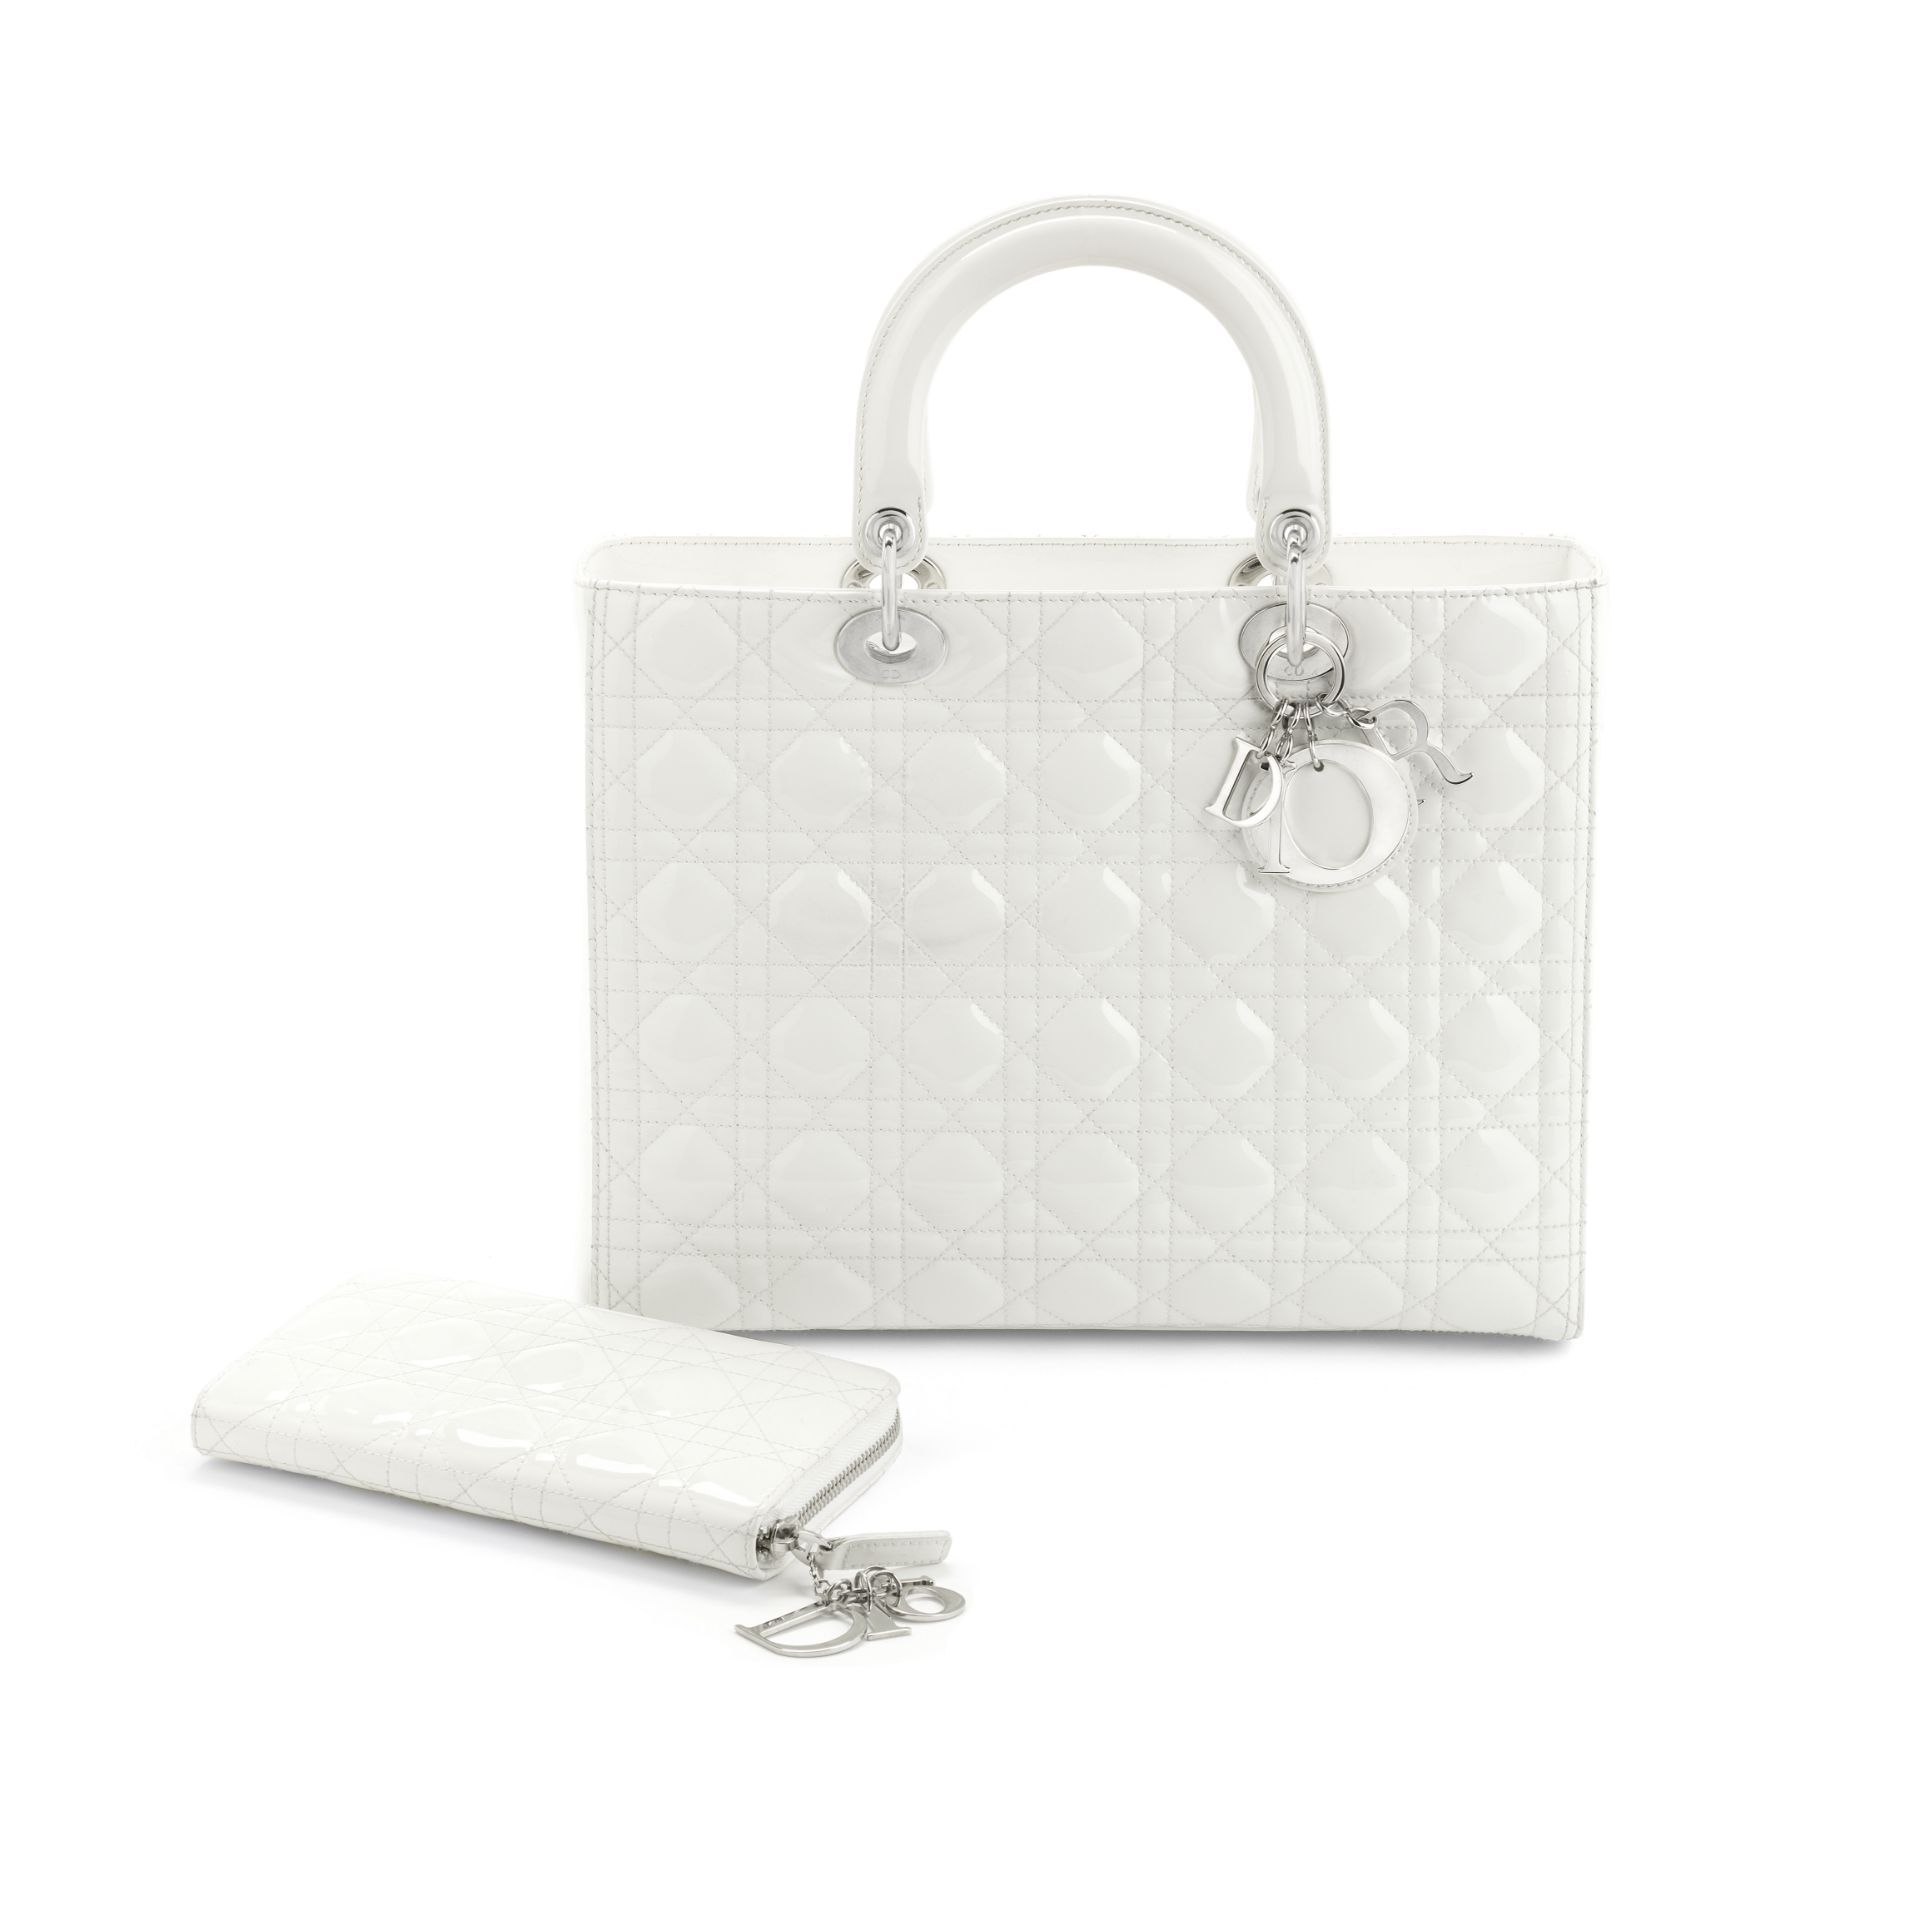 White Patent Leather Large Lady Dior Bag and Wallet, Christian Dior, c. 2010, (Includes shoulder...